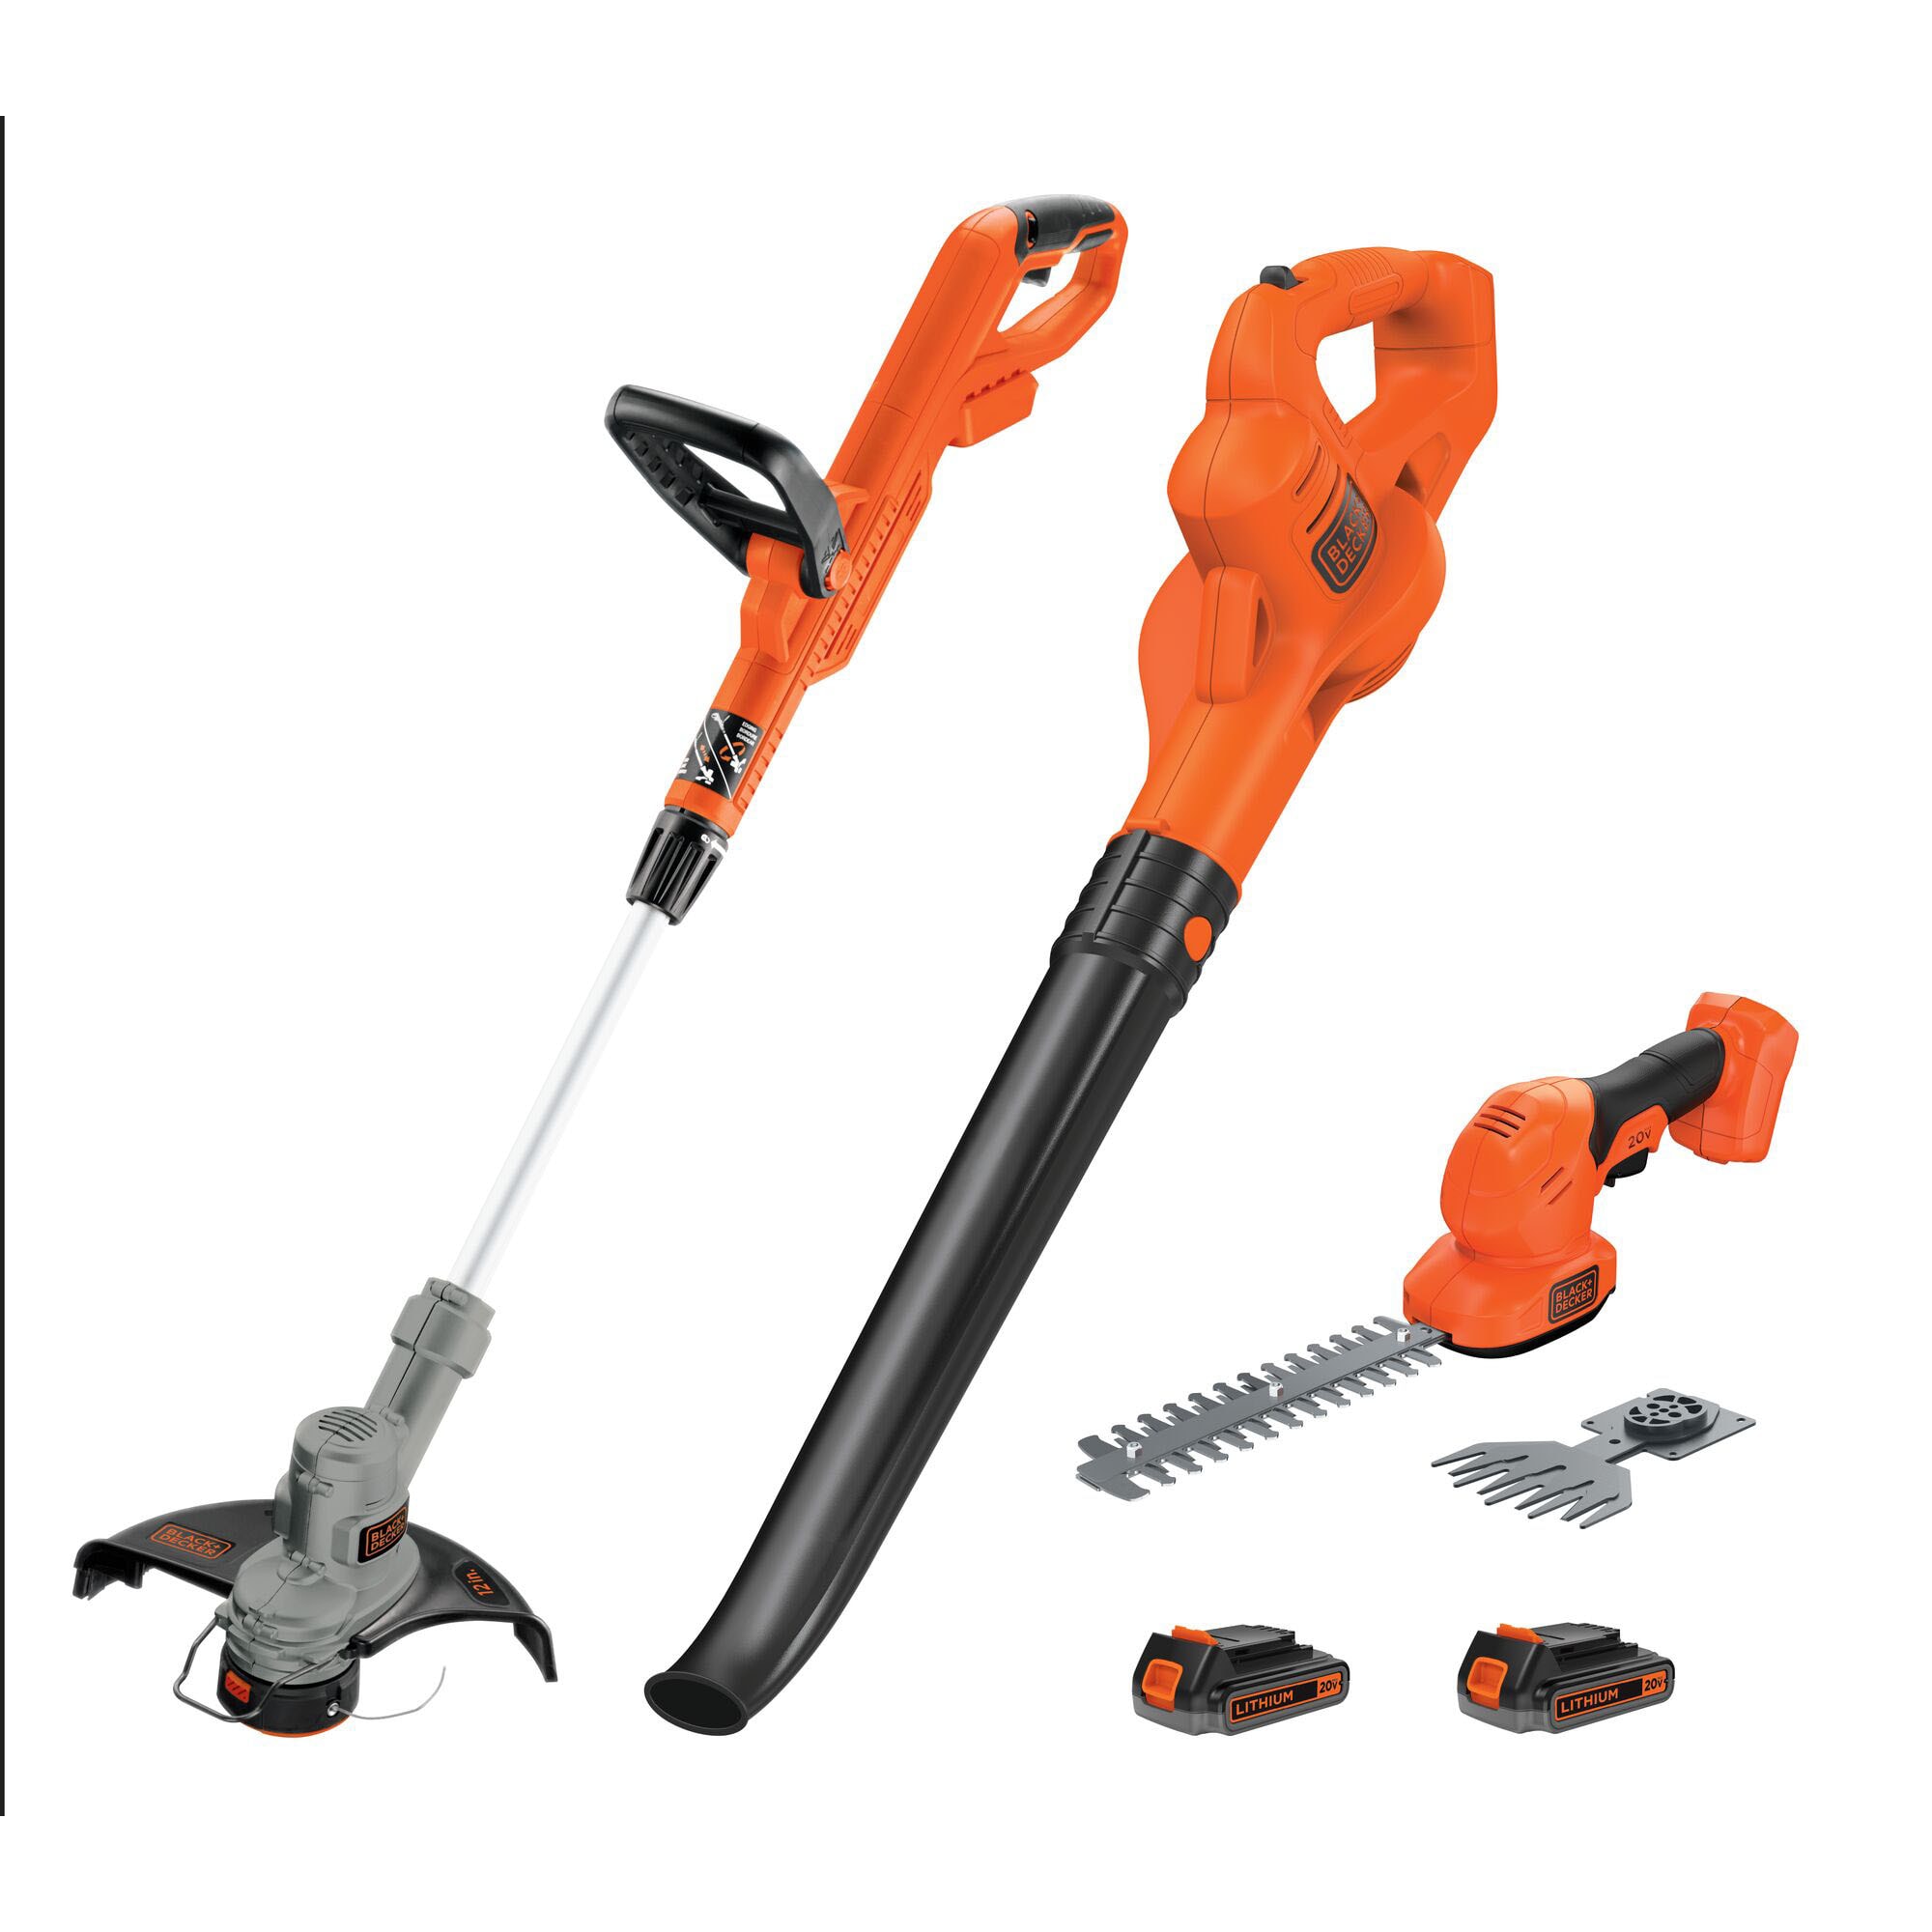 BLACK+DECKER LSW221 20V MAX* Cordless Lithium-Ion Sweeper Kit, 1.5Ah